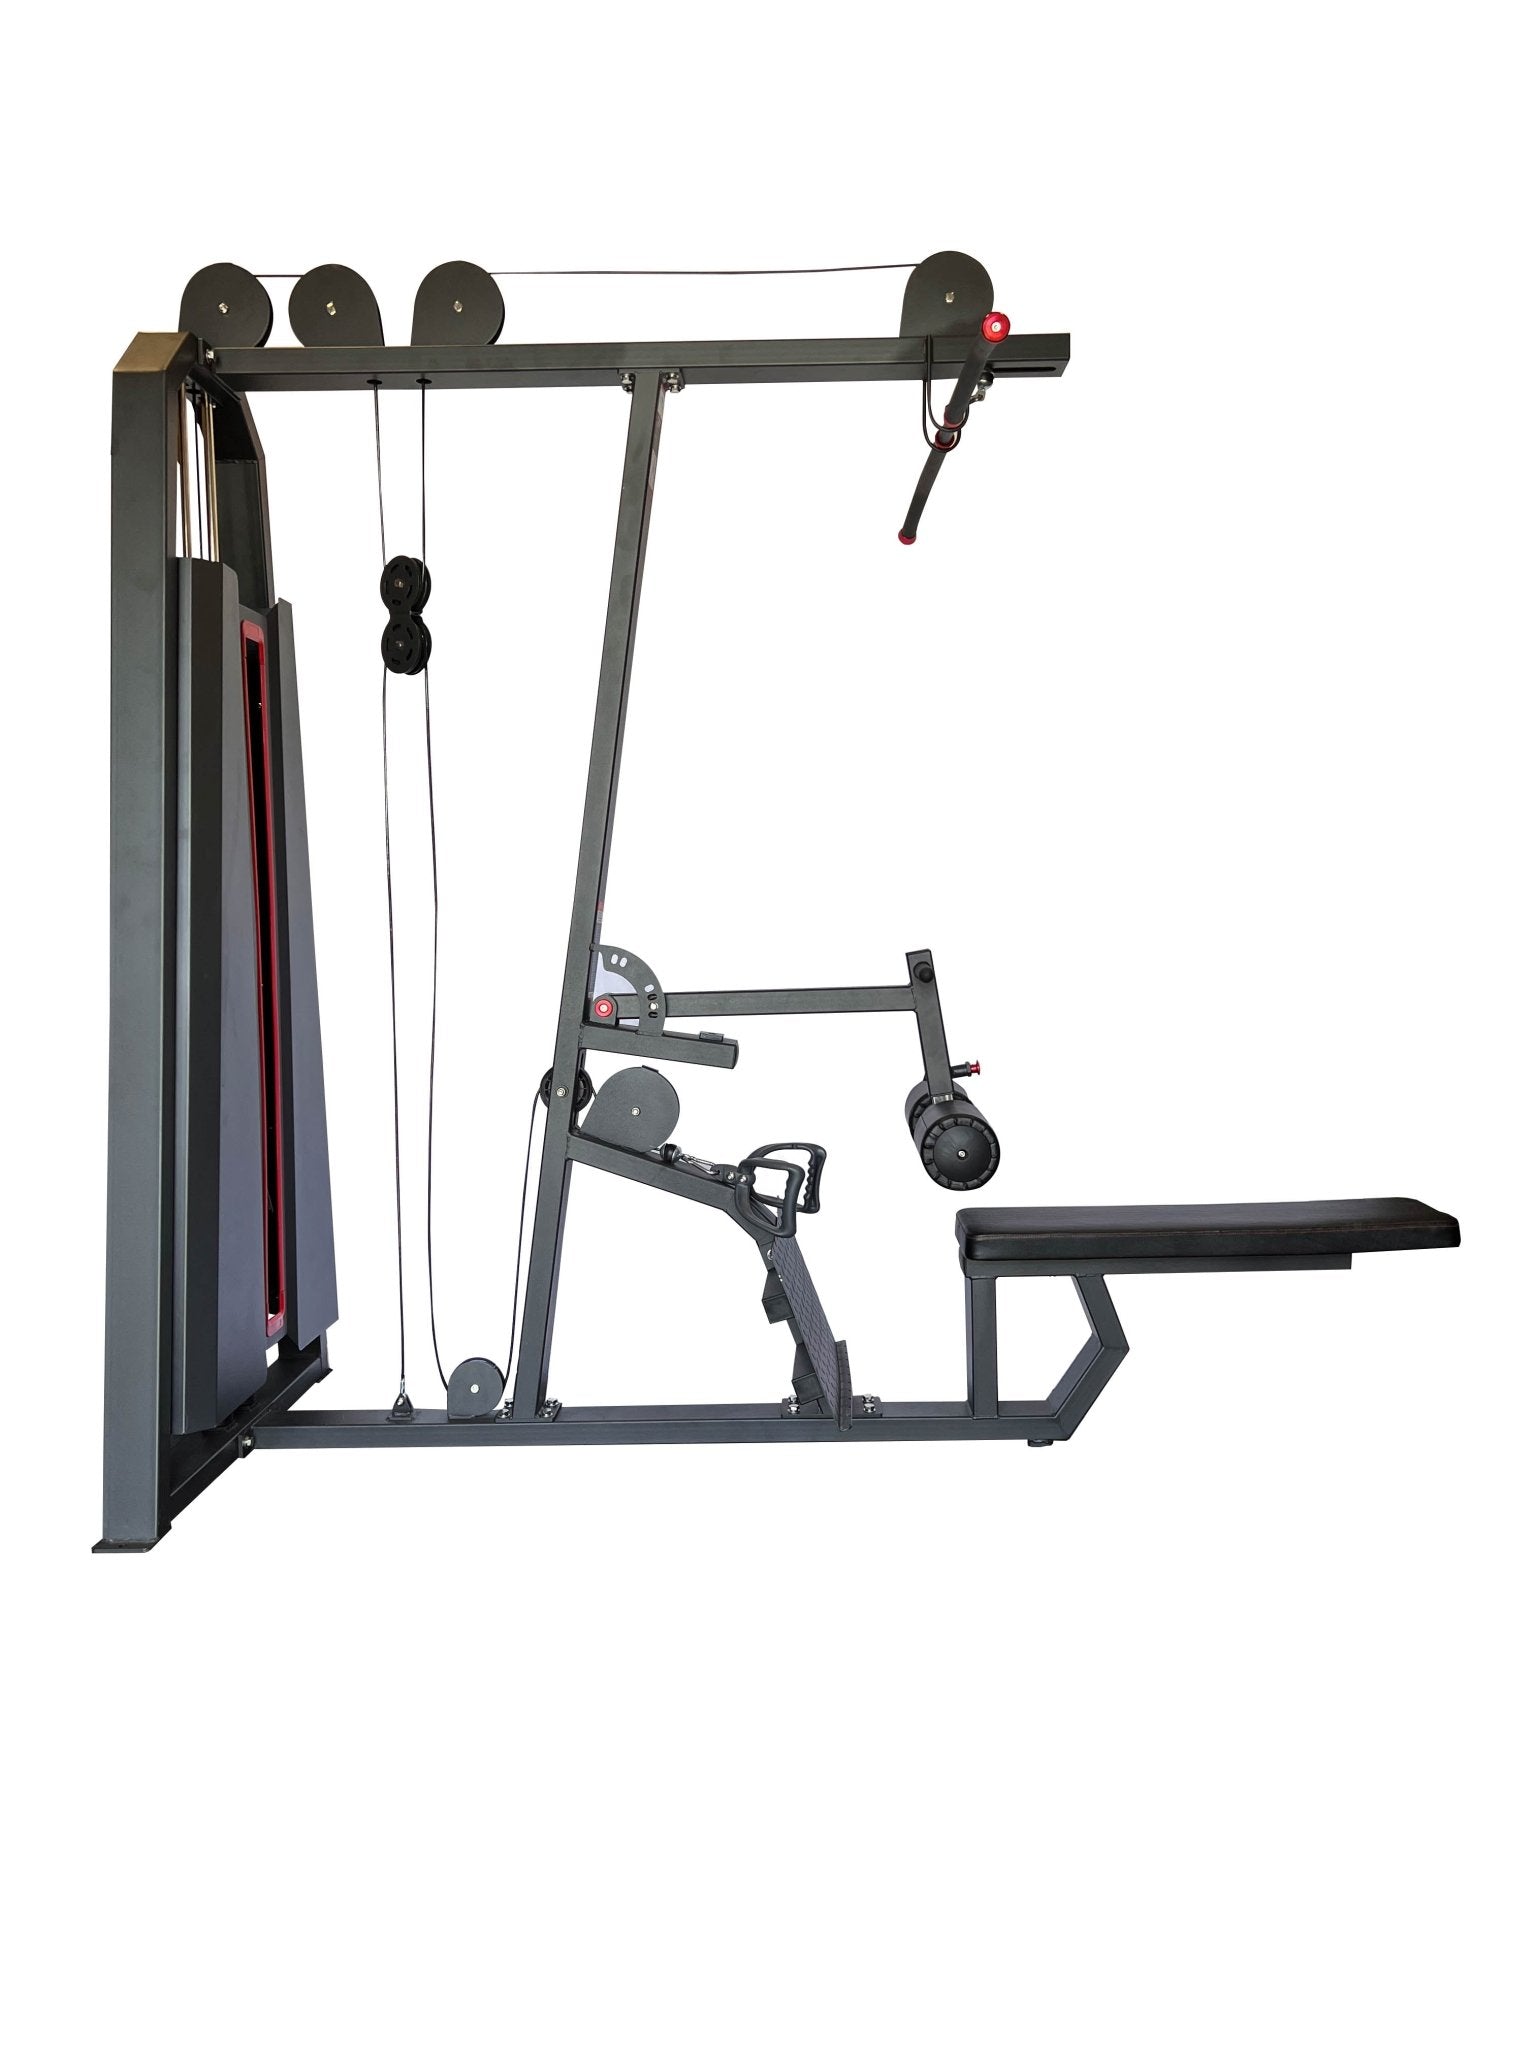 Lat Pull Down / Low Row Combo Cable Machine - Recon Health & Fitness